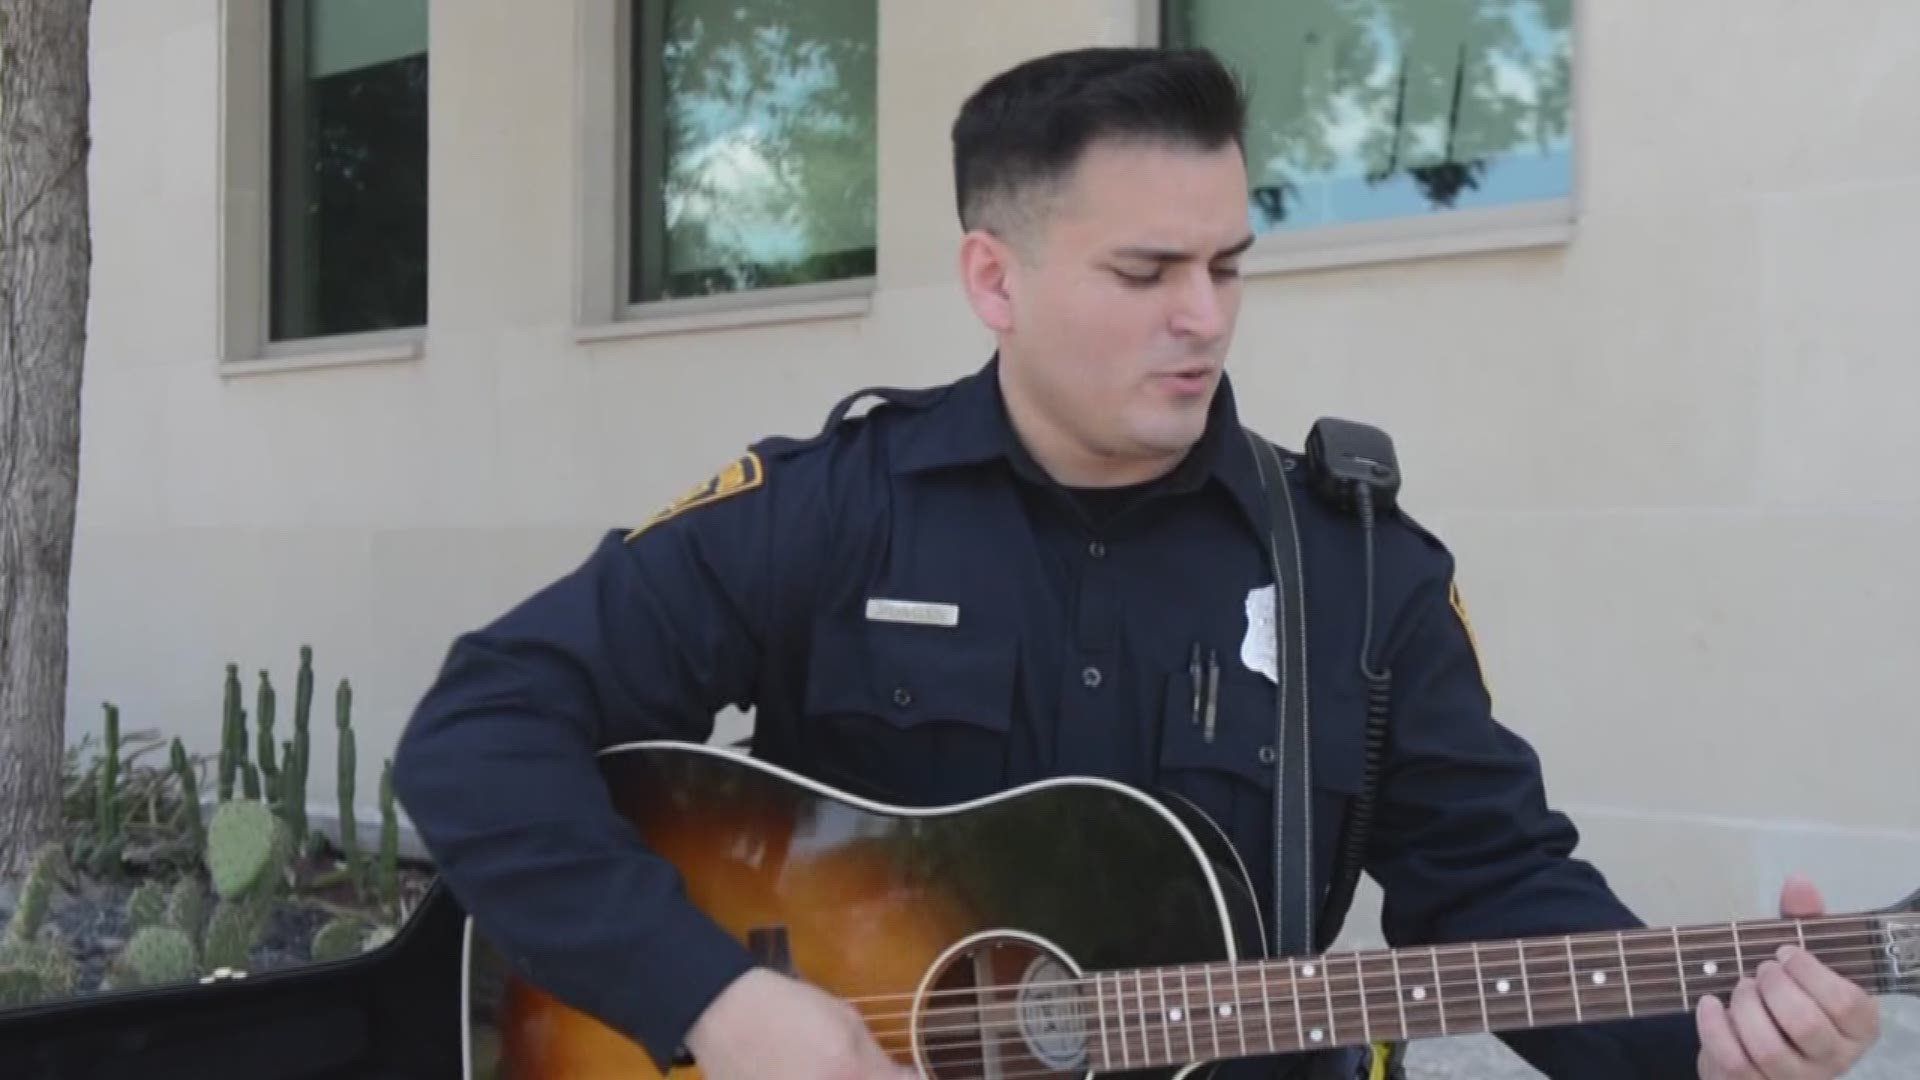 A San Antonio Police Department officer went viral after he sang his rendition of "Folsom Prison Blues" at roll call.